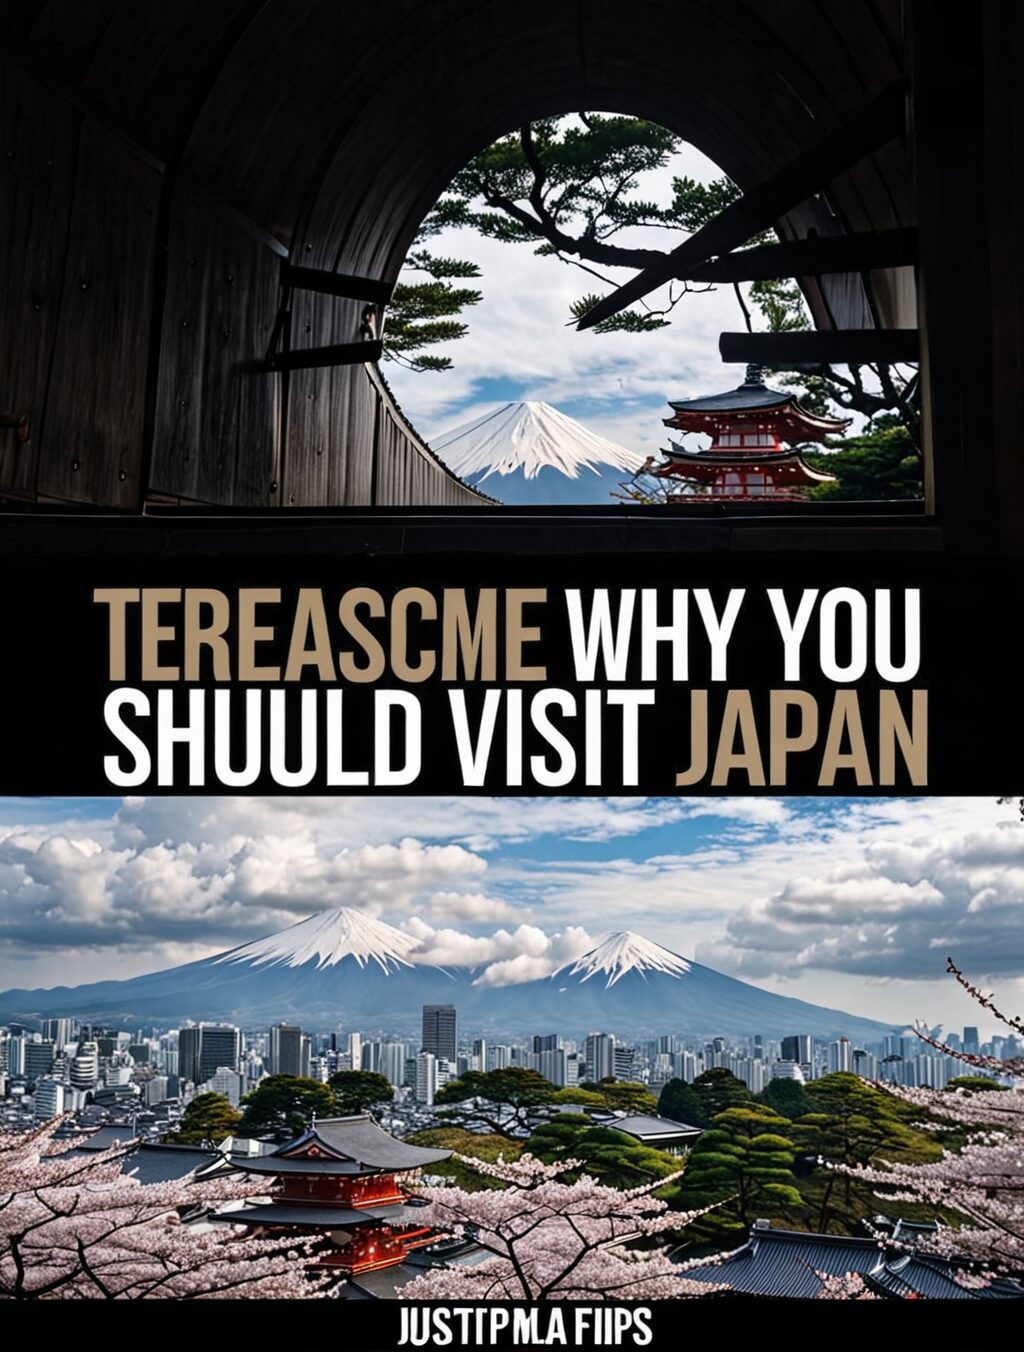 why visit japan multiple times